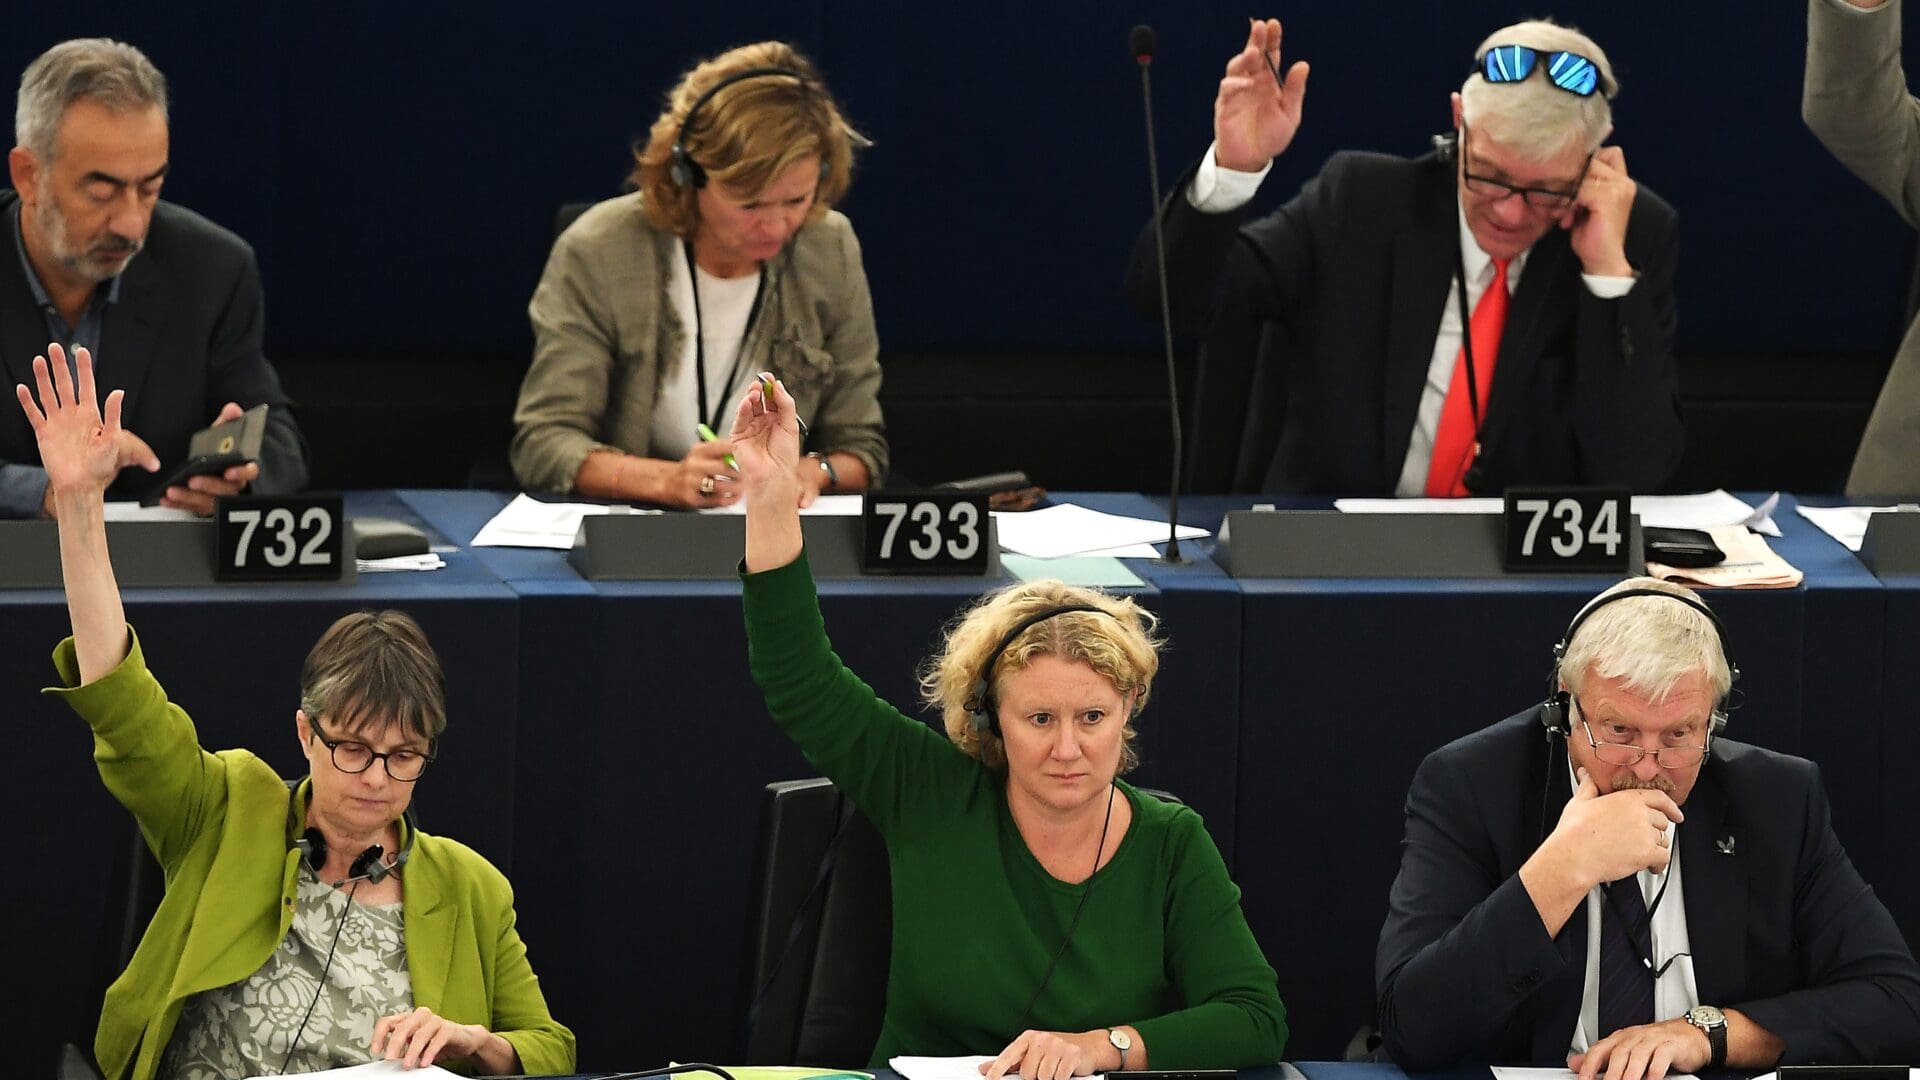 Member of European Parliament Judith Sargentini (C) votes on the situation in Hungary during a voting session at the European Parliament on September 12, 2018 in Strasbourg, eastern France.